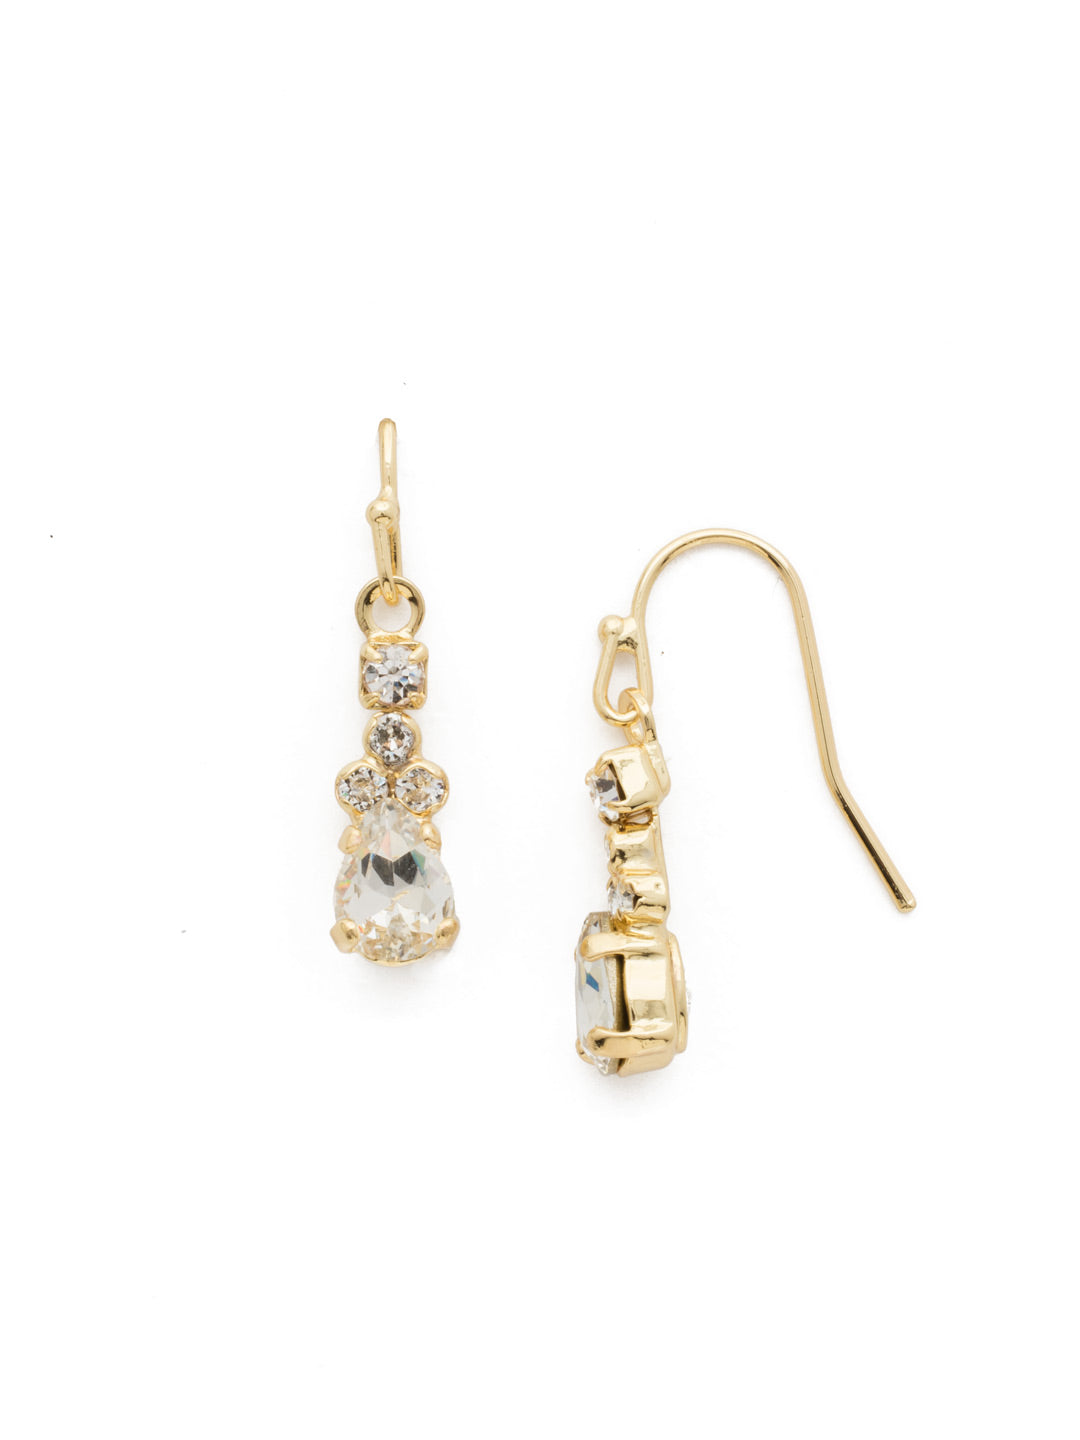 Product Image: Petite Poire Earring